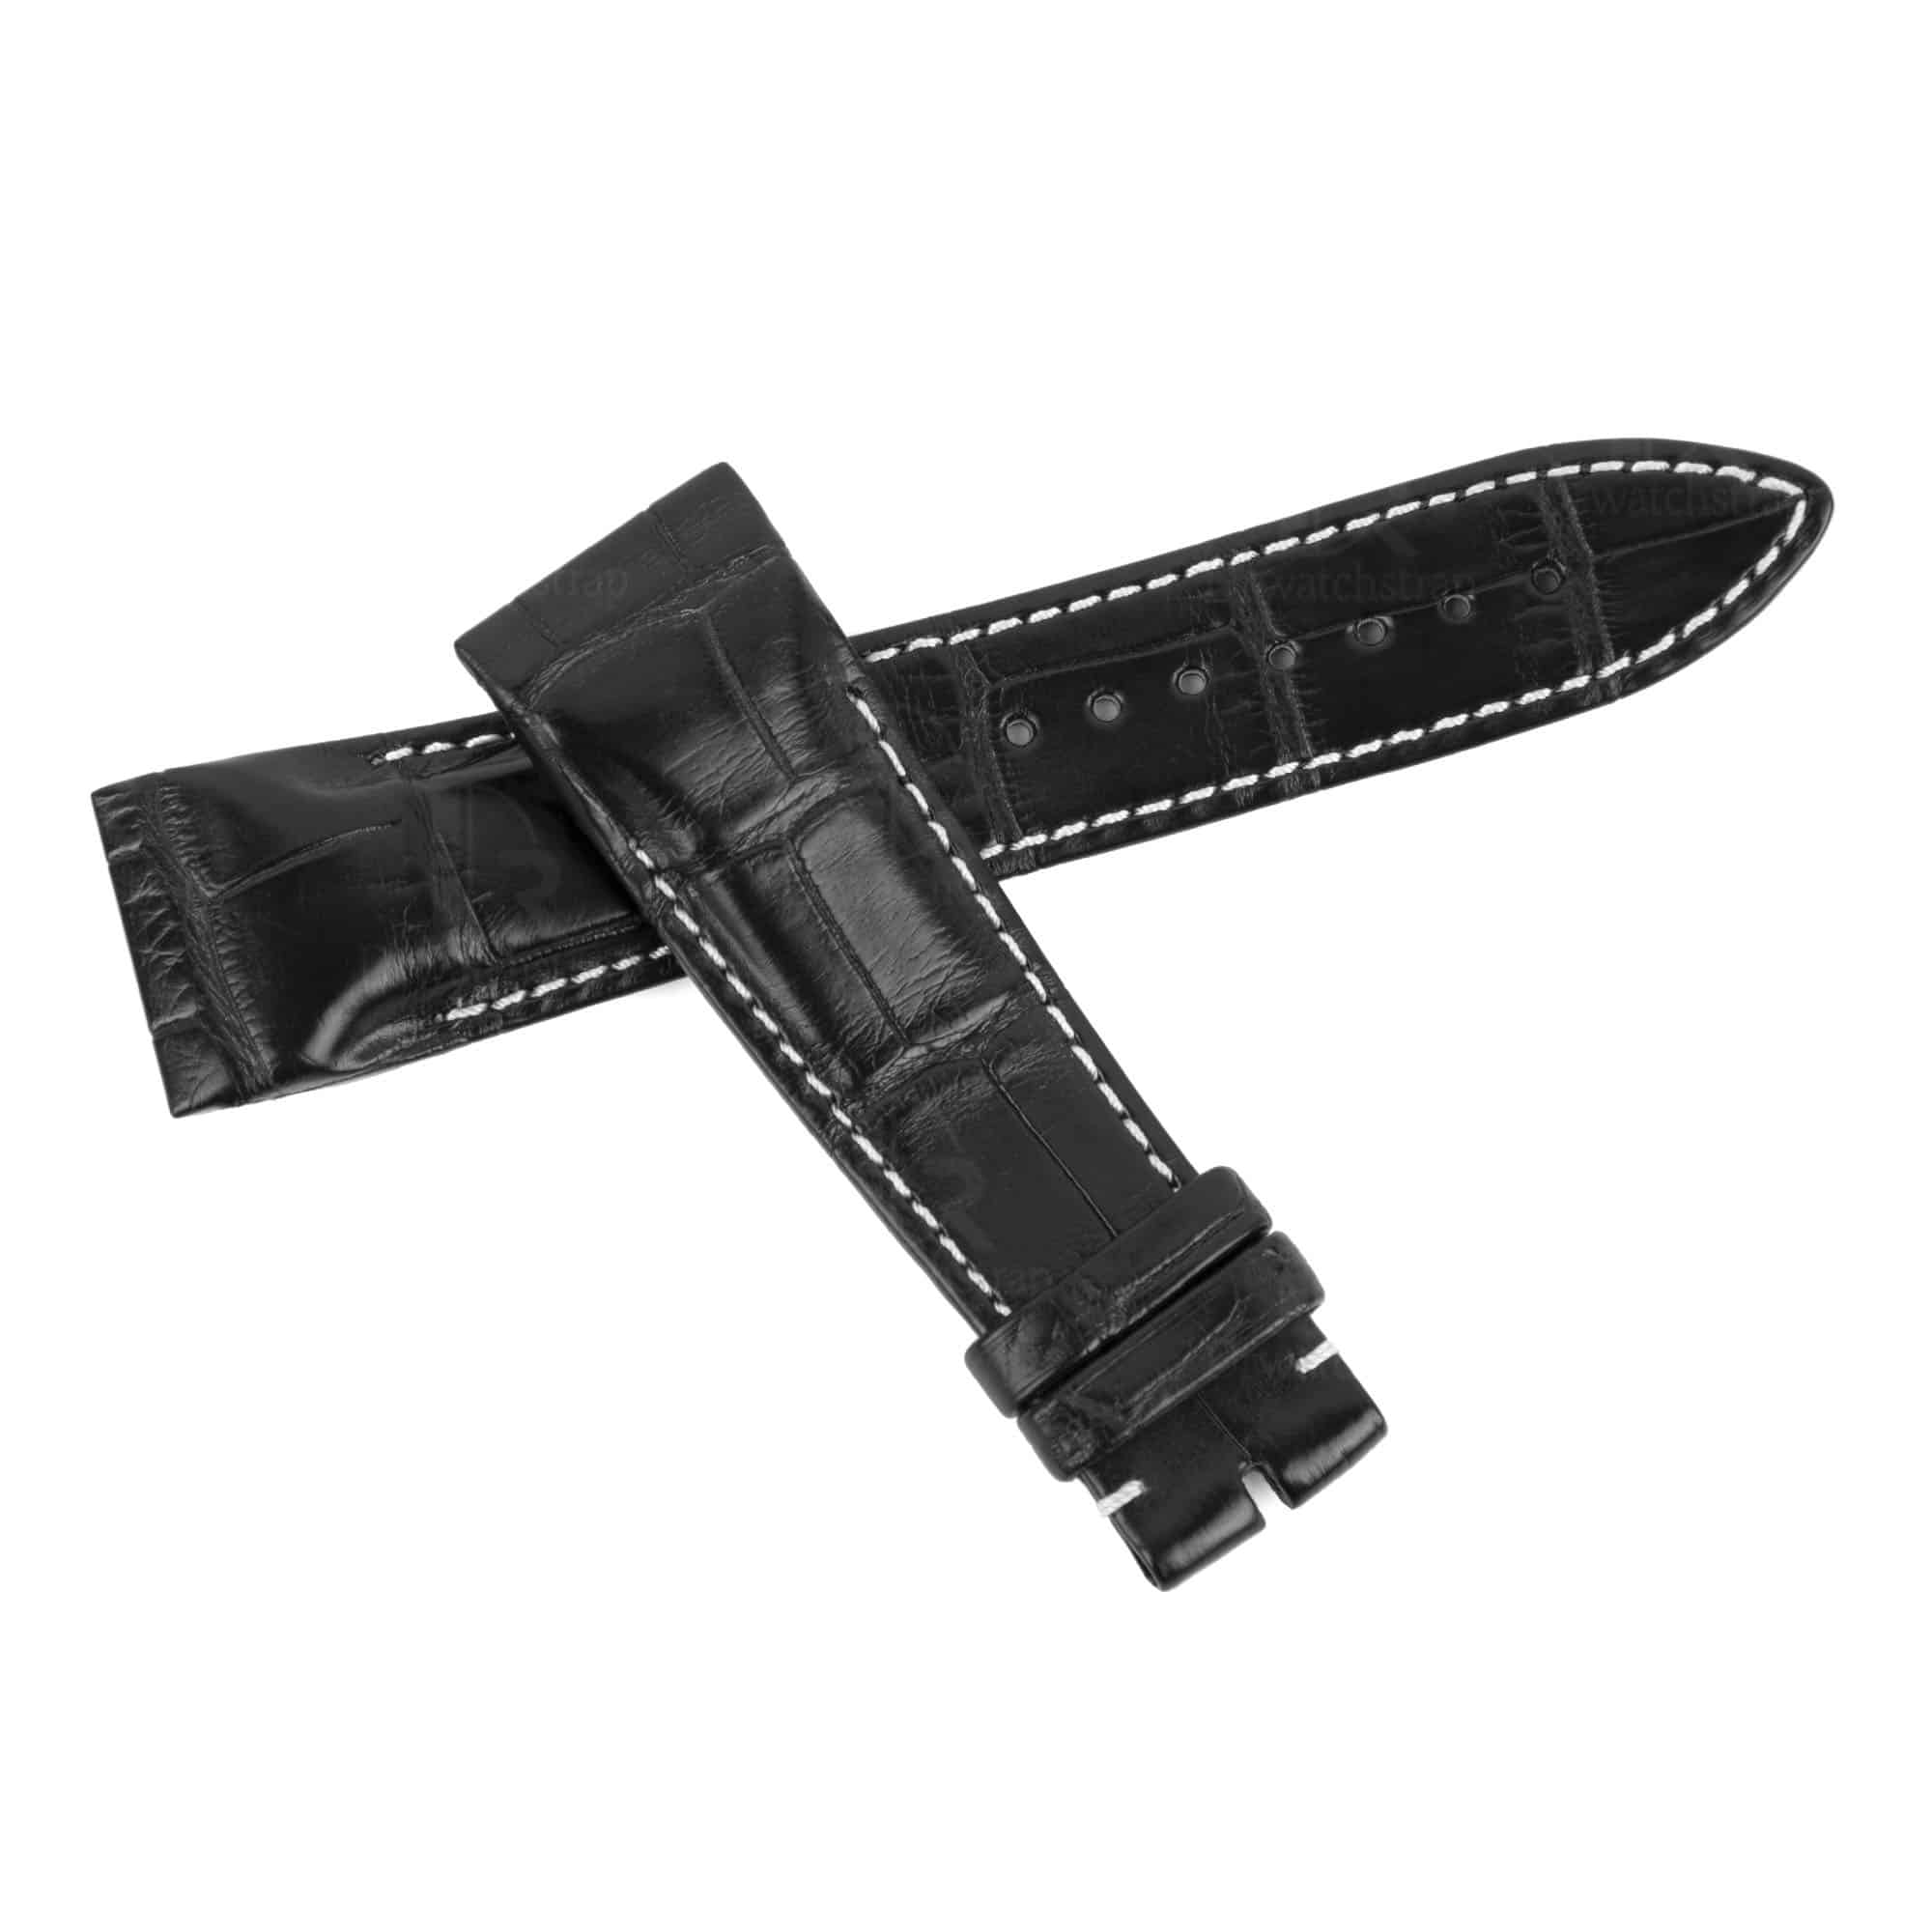 Custom handmade Grade A alligator black leather Franck Muller Conquistador strap and watch band replacement for Franck Muller Conquistador Grand Prix 8900 9900 SC DT GPG luxury watches - Best quality crocodile watch bands online at a low price